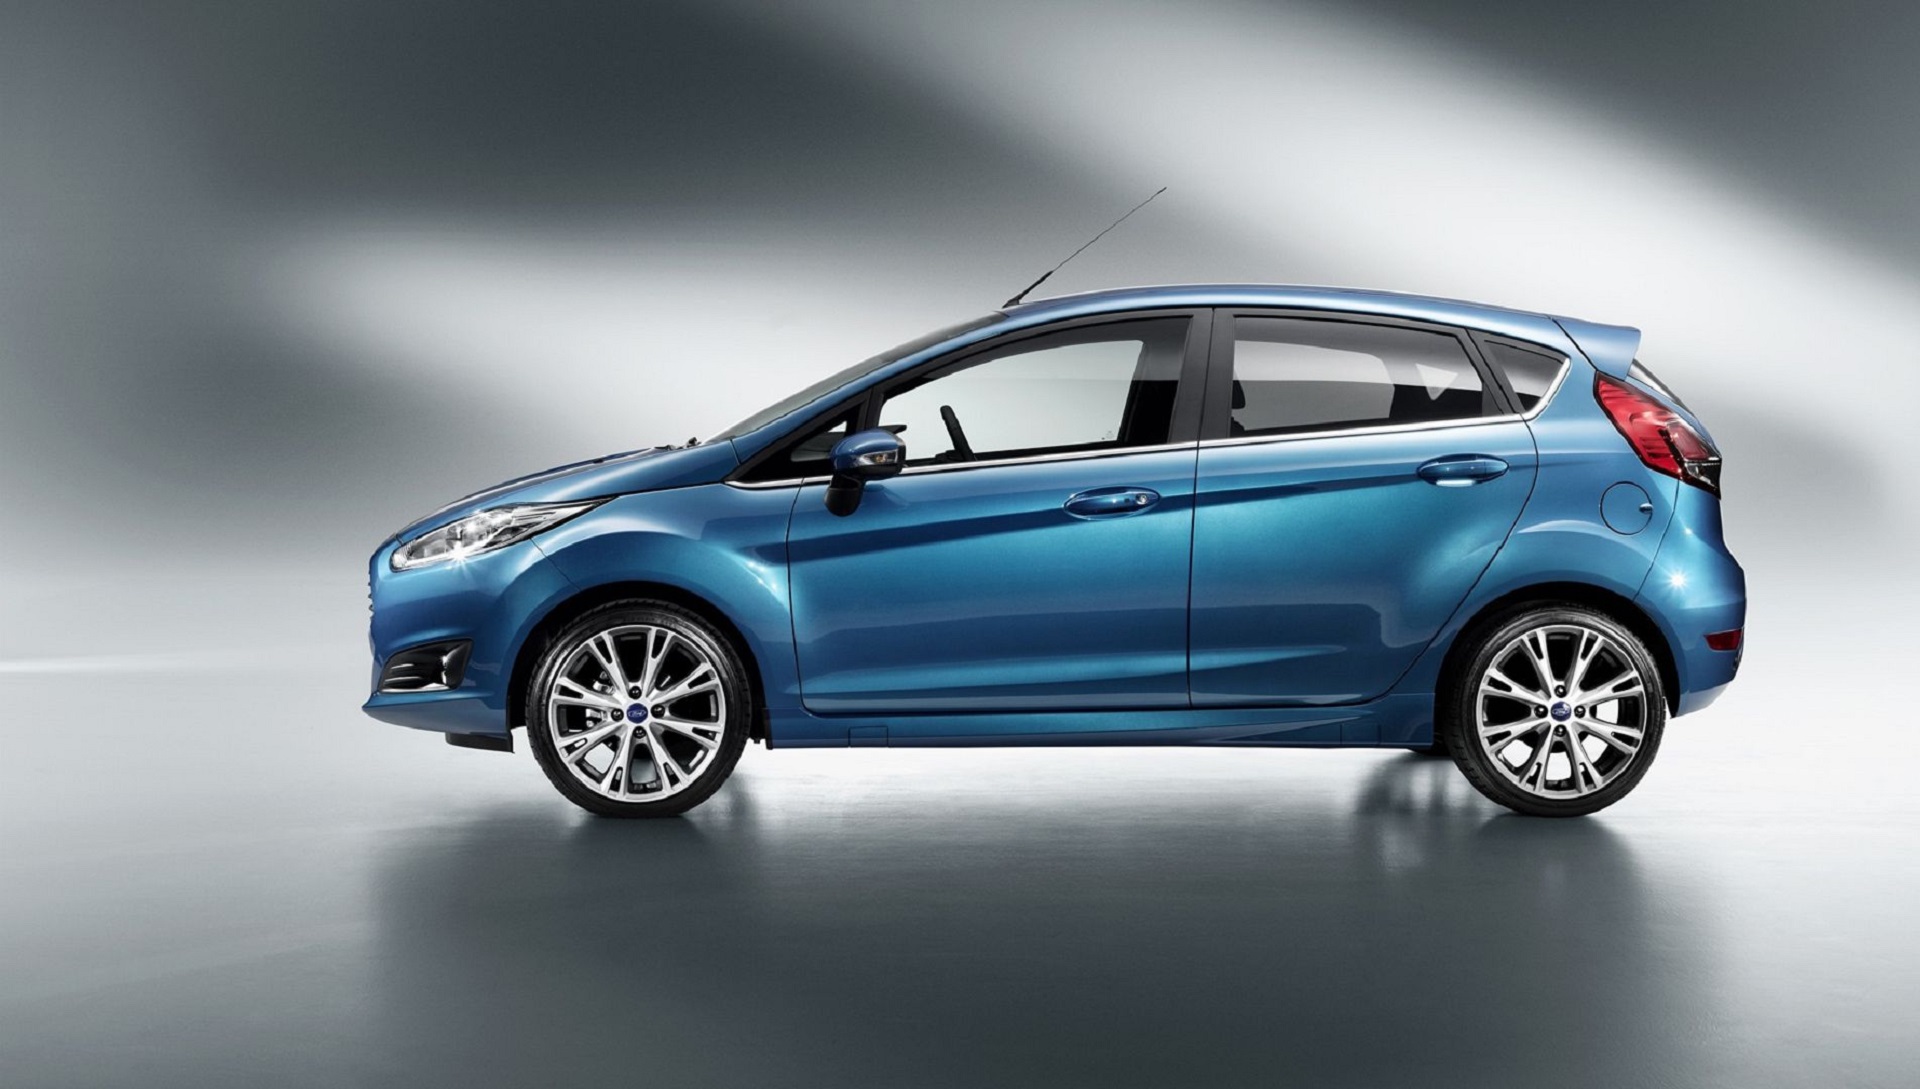 Ford Fiesta Wallpapers Images Photos Pictures Backgrounds